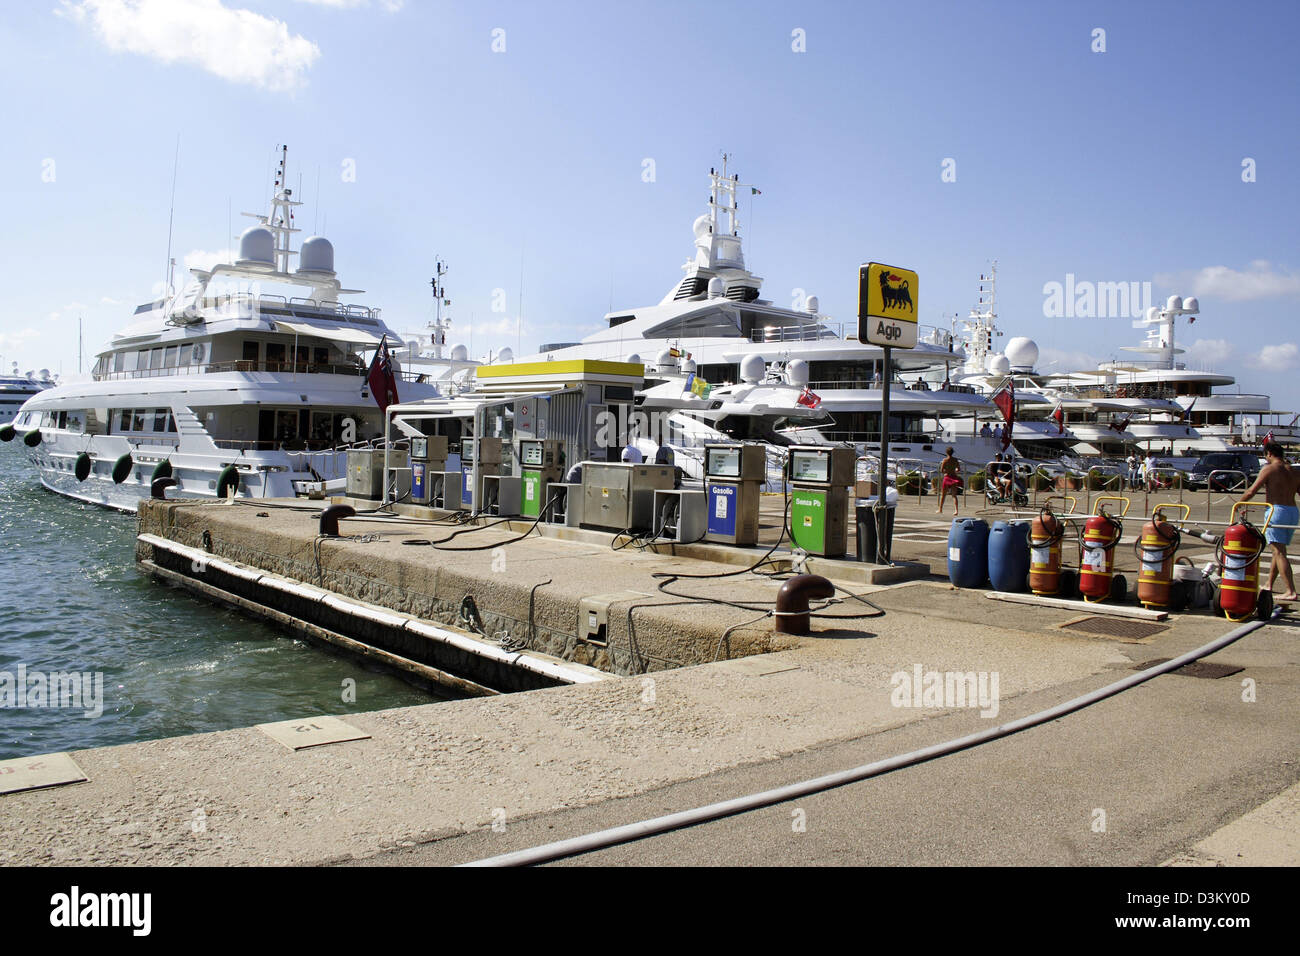 (dpa) - Yachts dock at a pier of Italian oil company 'Agib', which also serves as a petrol station for boats in the harbour of Porto Cervo, Sardinia, Italy, 03 August 2005. Photo: Lars Halbauer Stock Photo